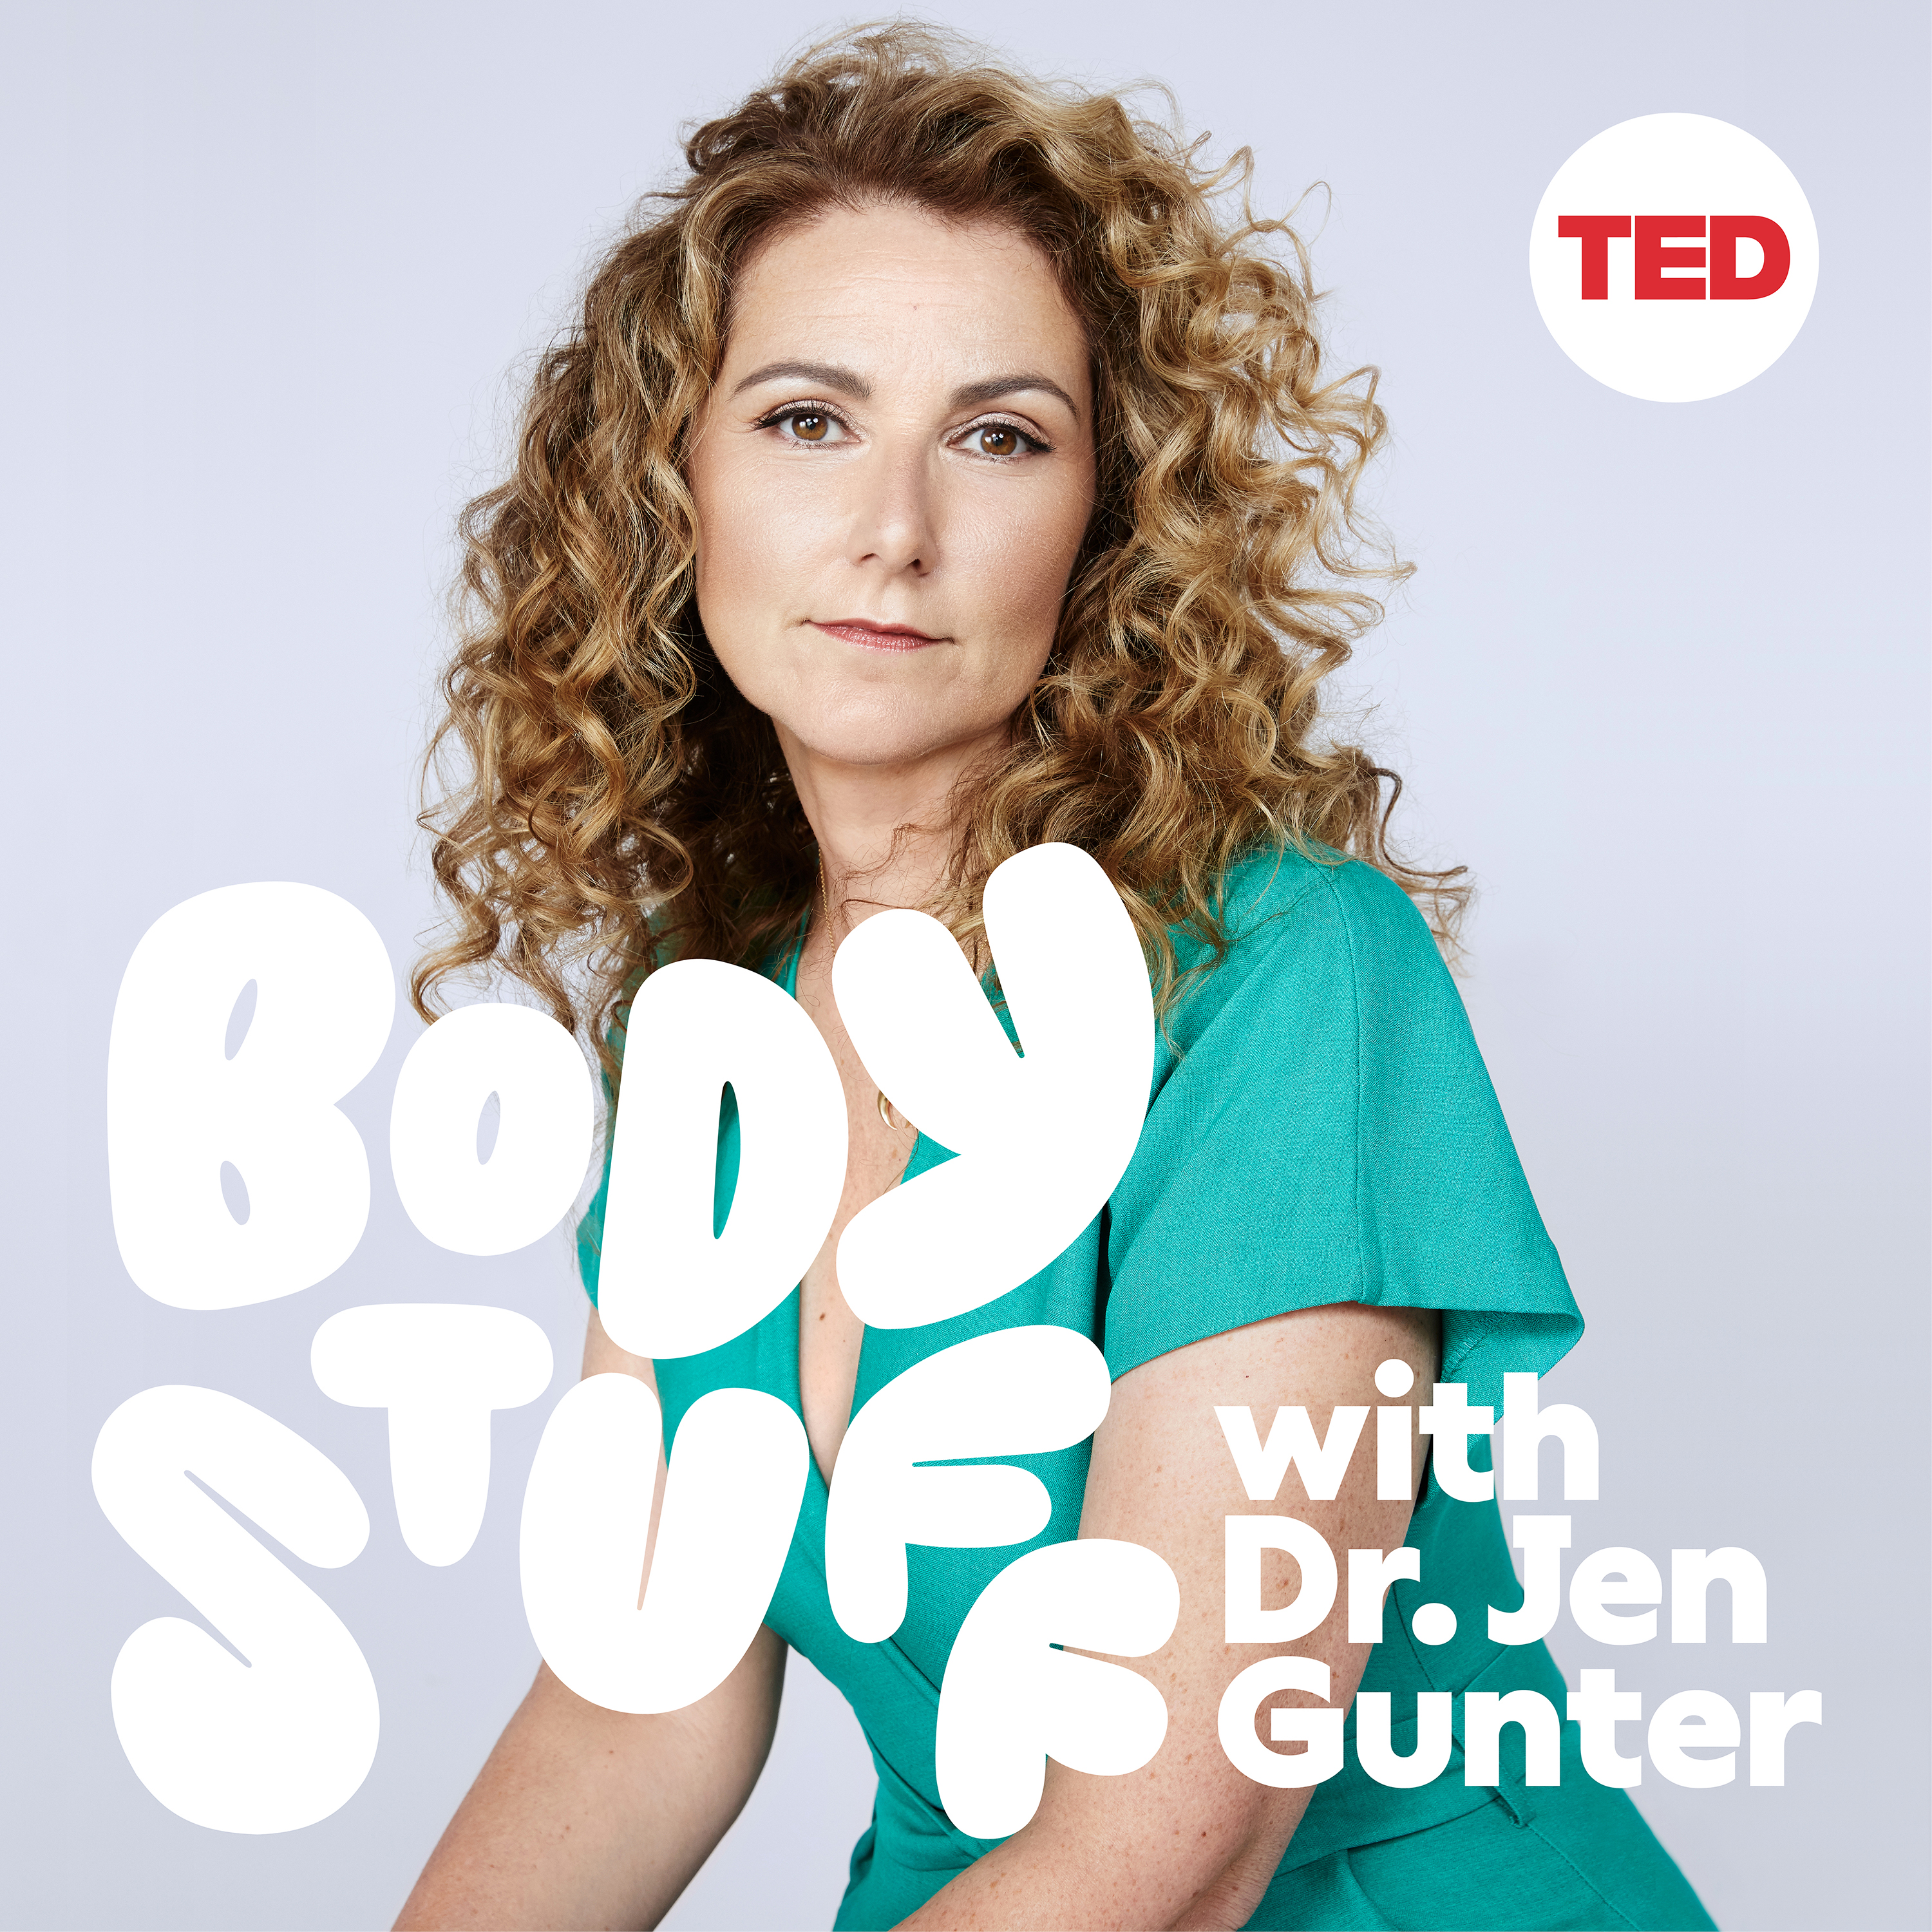 Body Stuff with Dr. Jen Gunter by TED